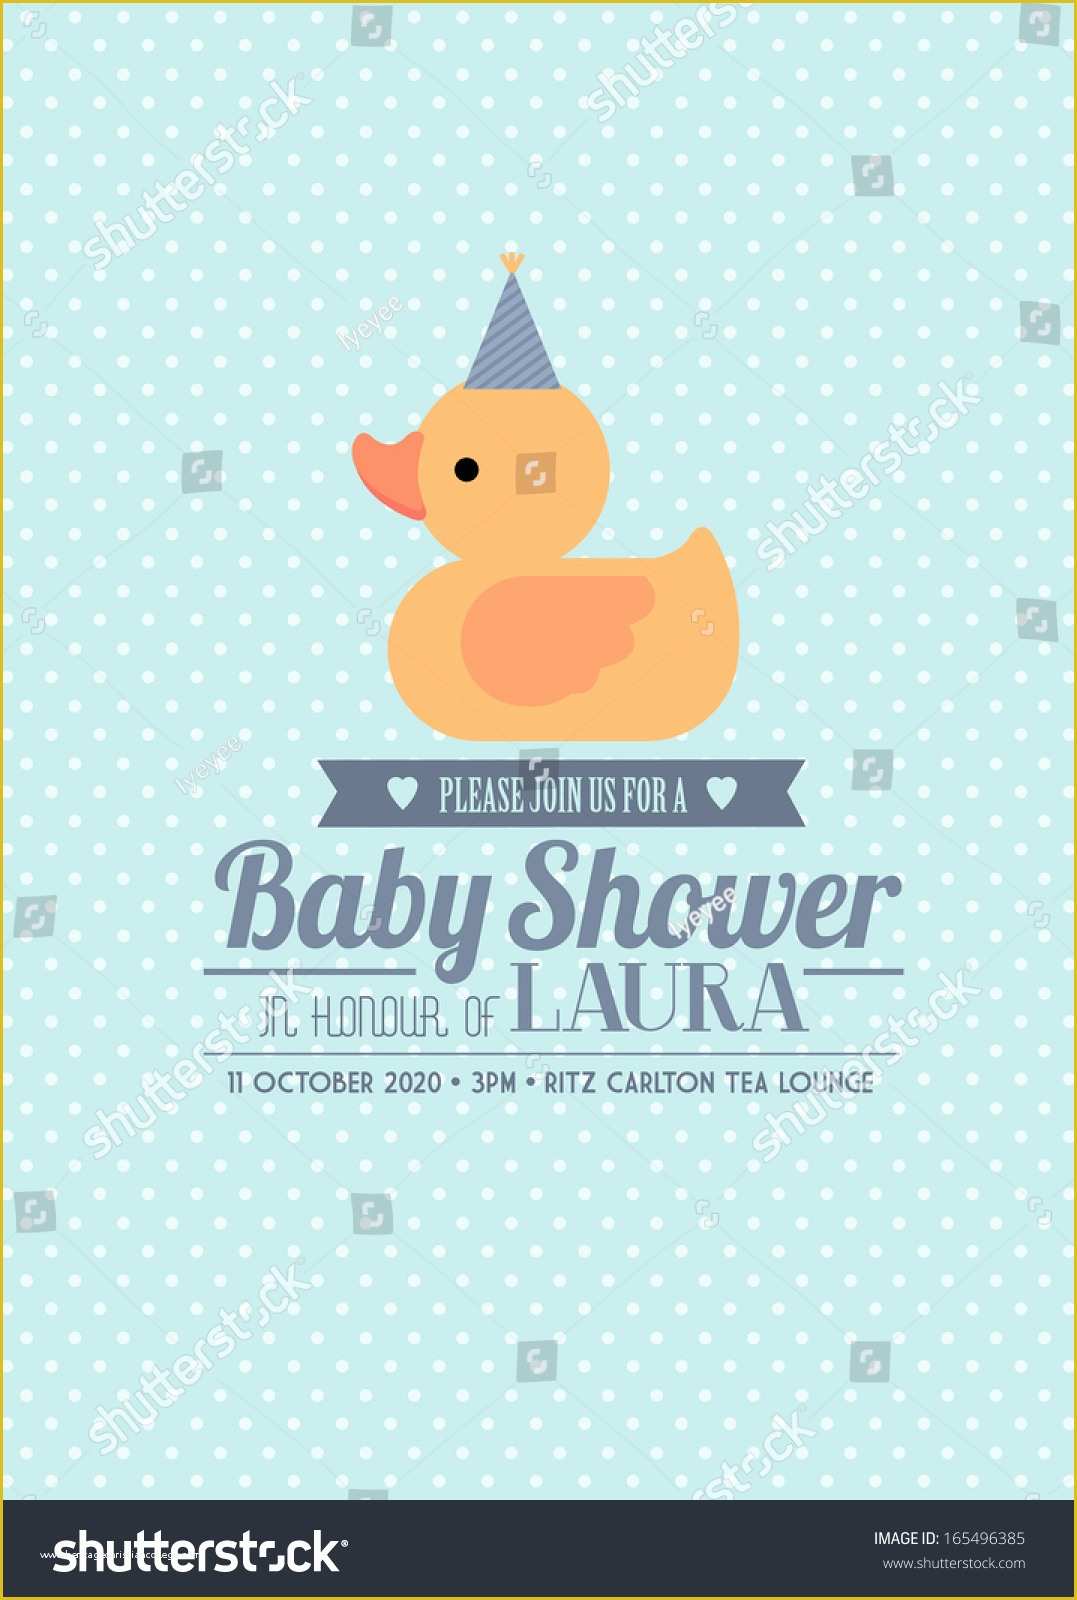 Rubber Ducky Baby Shower Invitations Template Free Of Rubber Ducky Baby Shower Invitation Card Template Boy